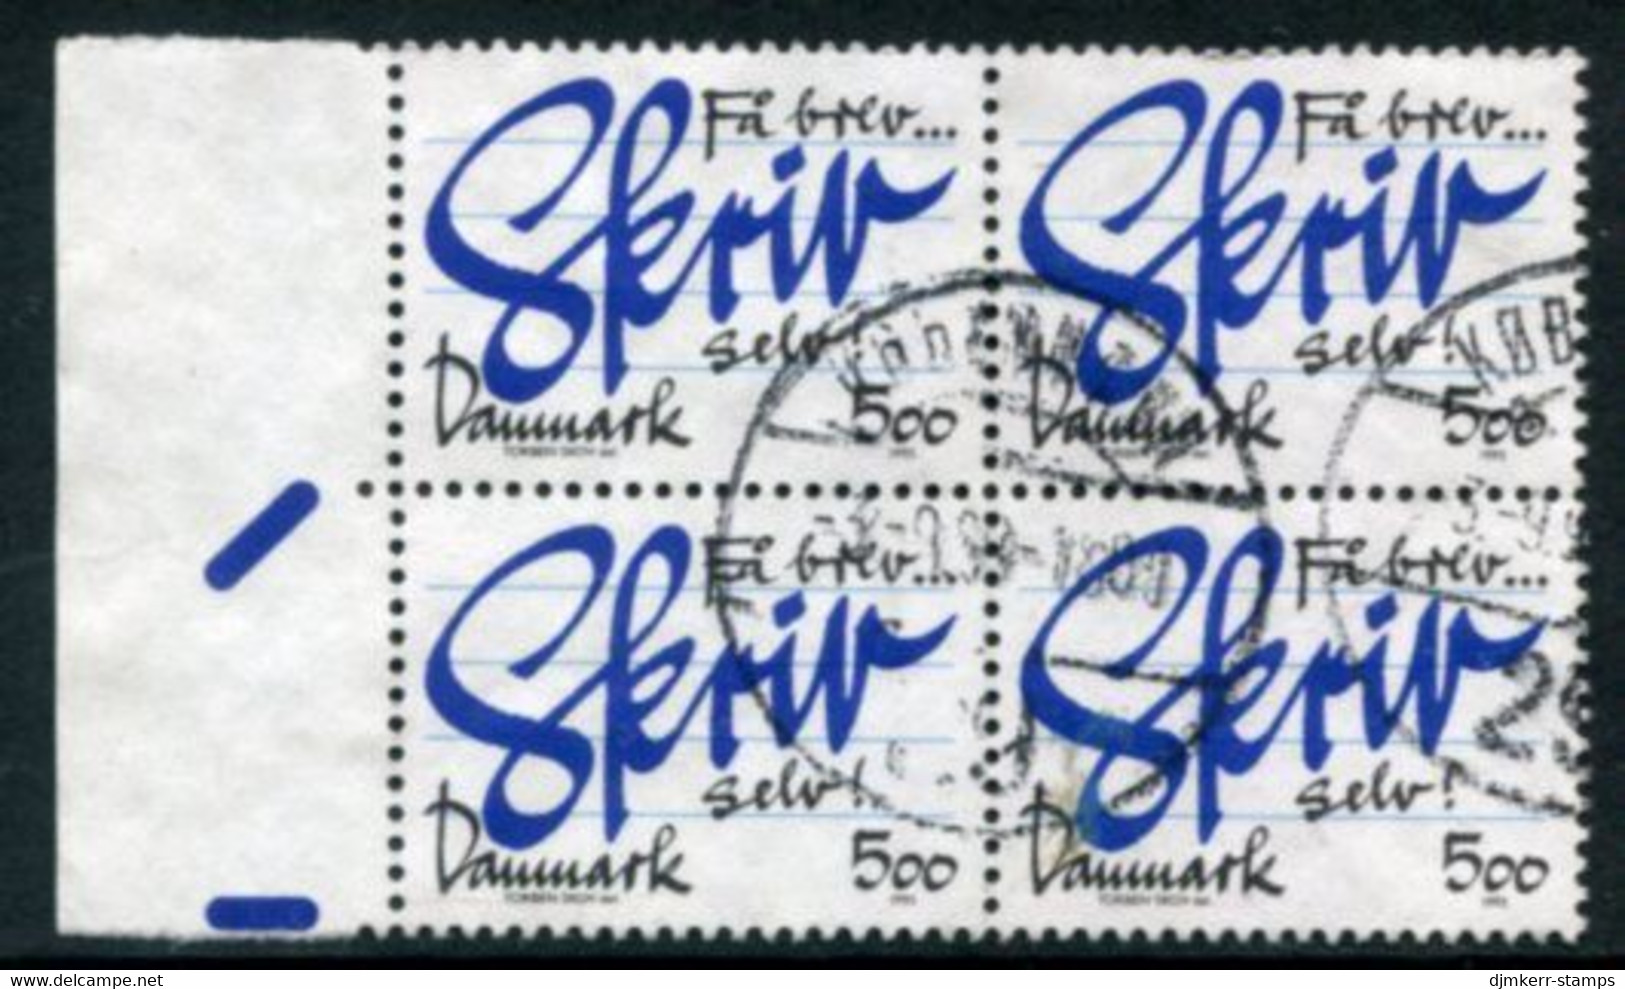 DENMARK 1993 Letter-writing Campaign Block Of 4 Used. Michel 1062 - Oblitérés